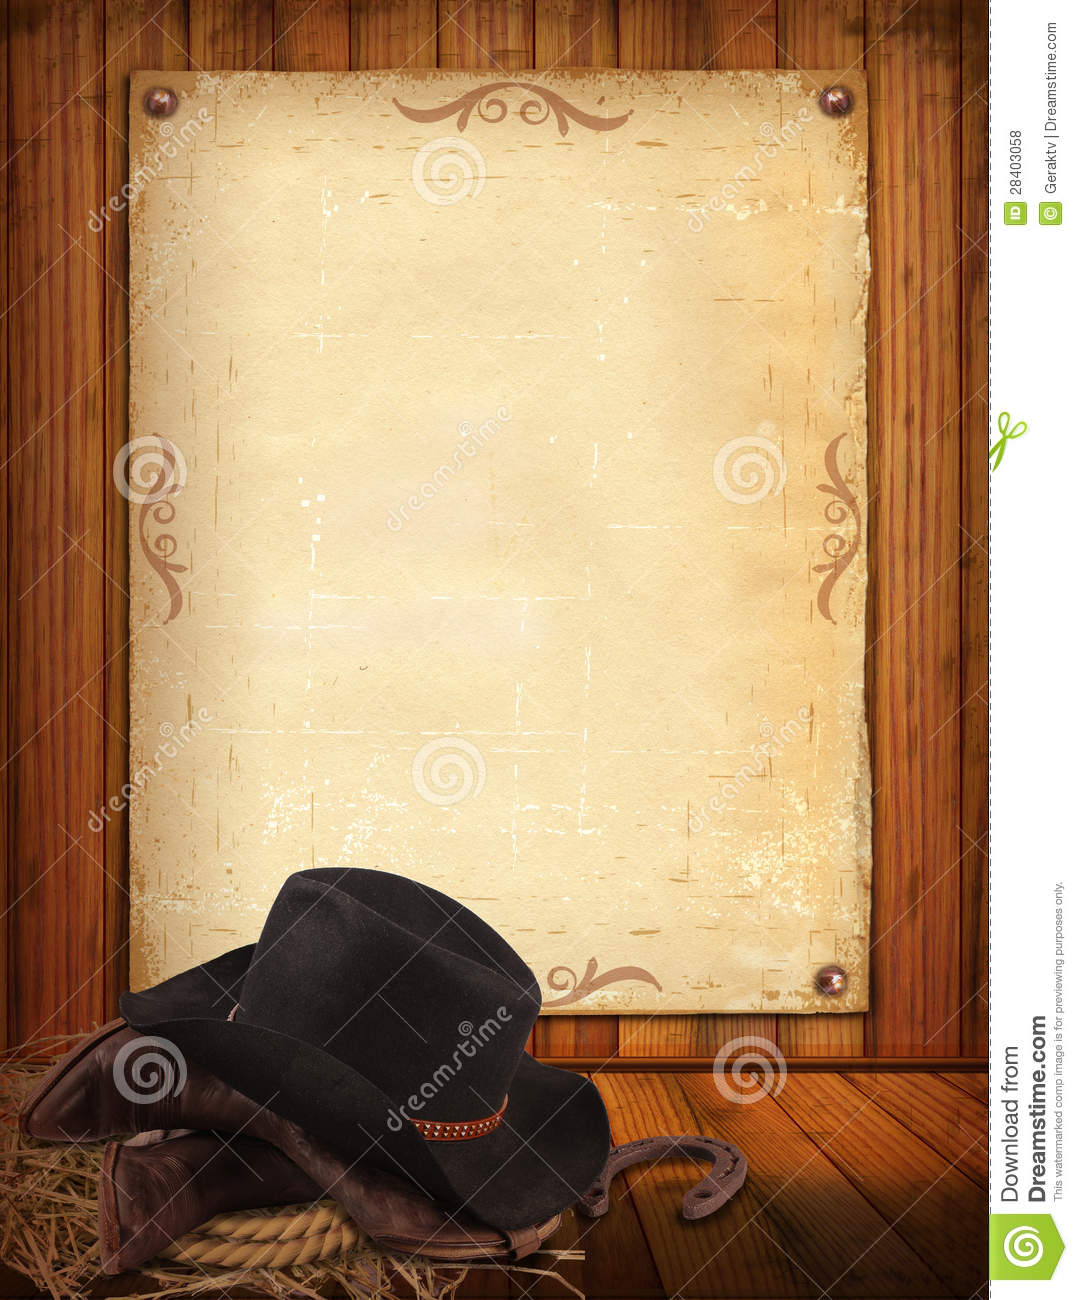 Photos Western Background Cowboy Clothes Old Paper Text Image28403058